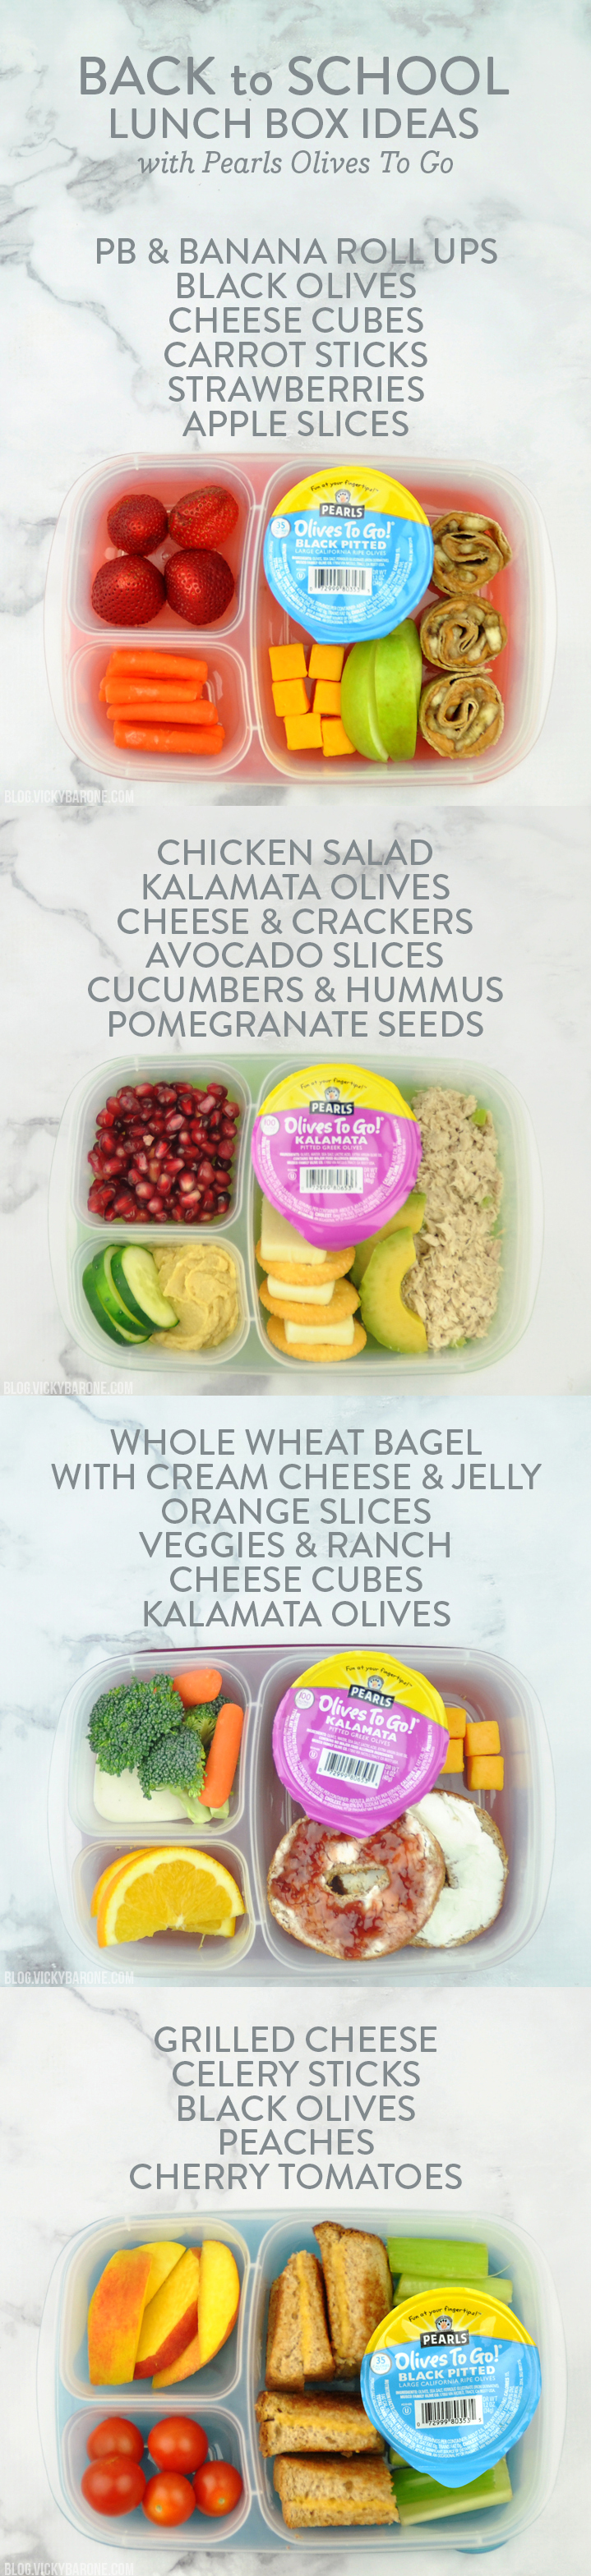 Back to School Lunch Box Ideas with Pearls Olives To Go | Vicky Barone